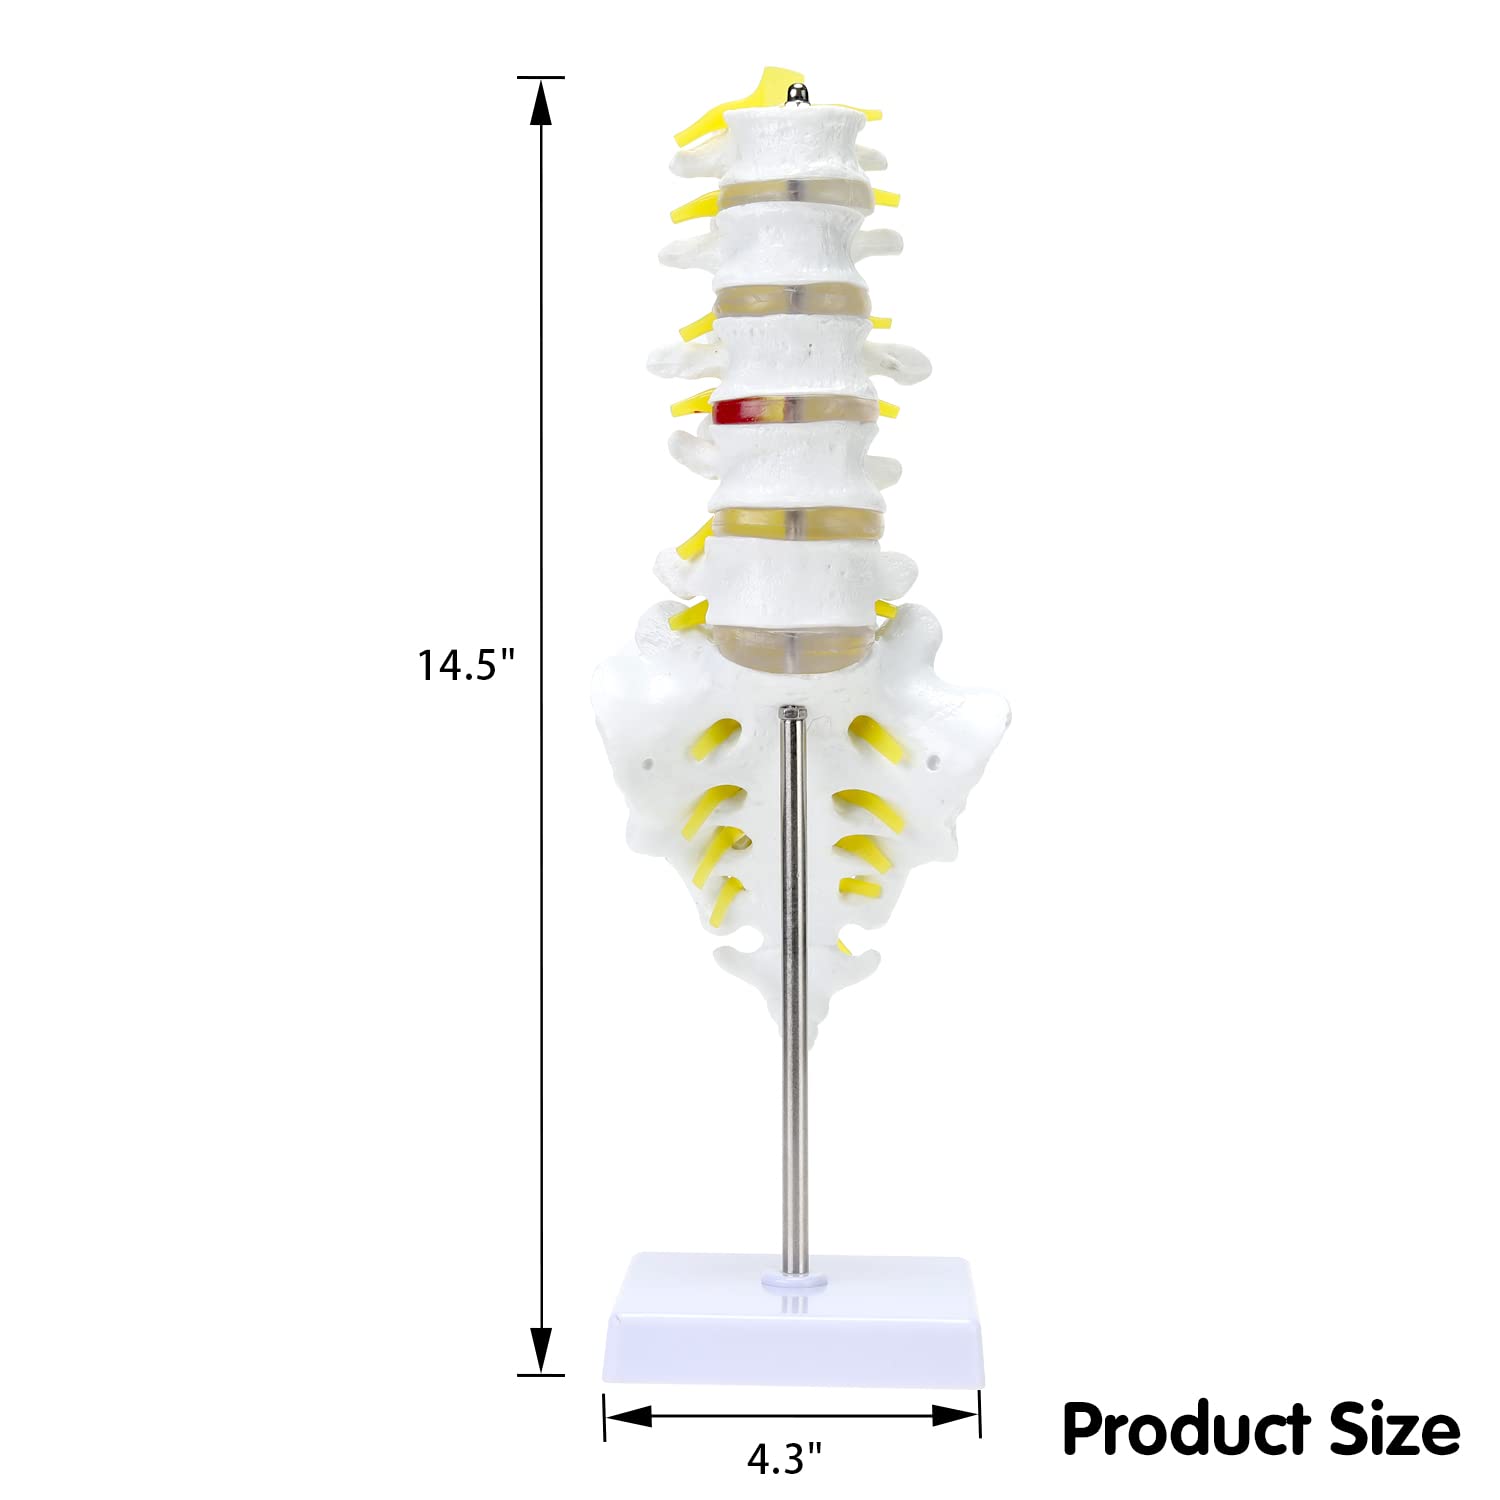 RONTEN Lumbar Spine Model Lumbosacral Segment Model with A Herniated Disc At L4 and Spinal Nerves Size